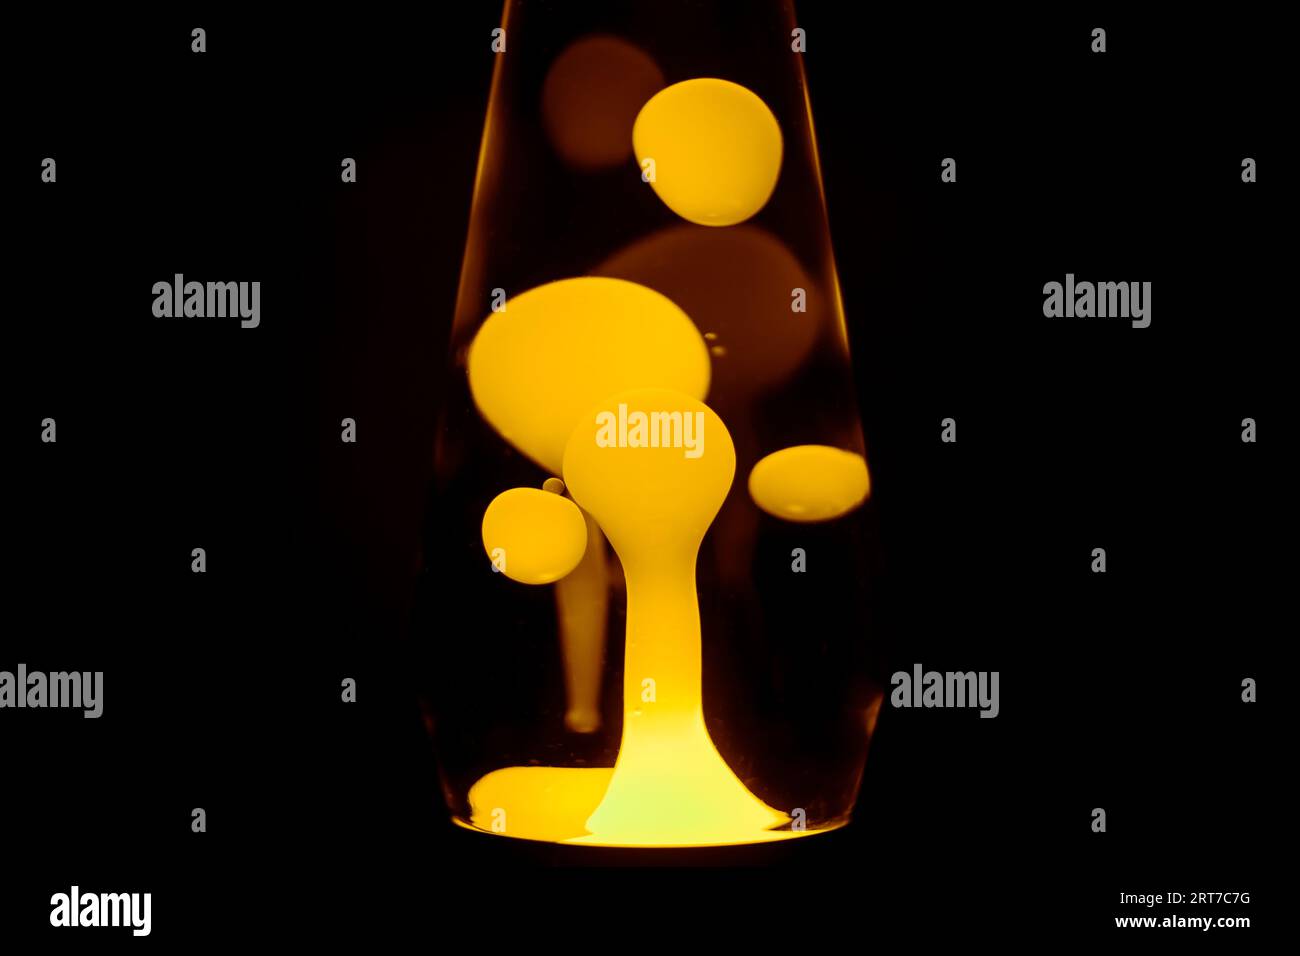 Yellow lava lamp, black background, horizontal format with copy space Stock Photo